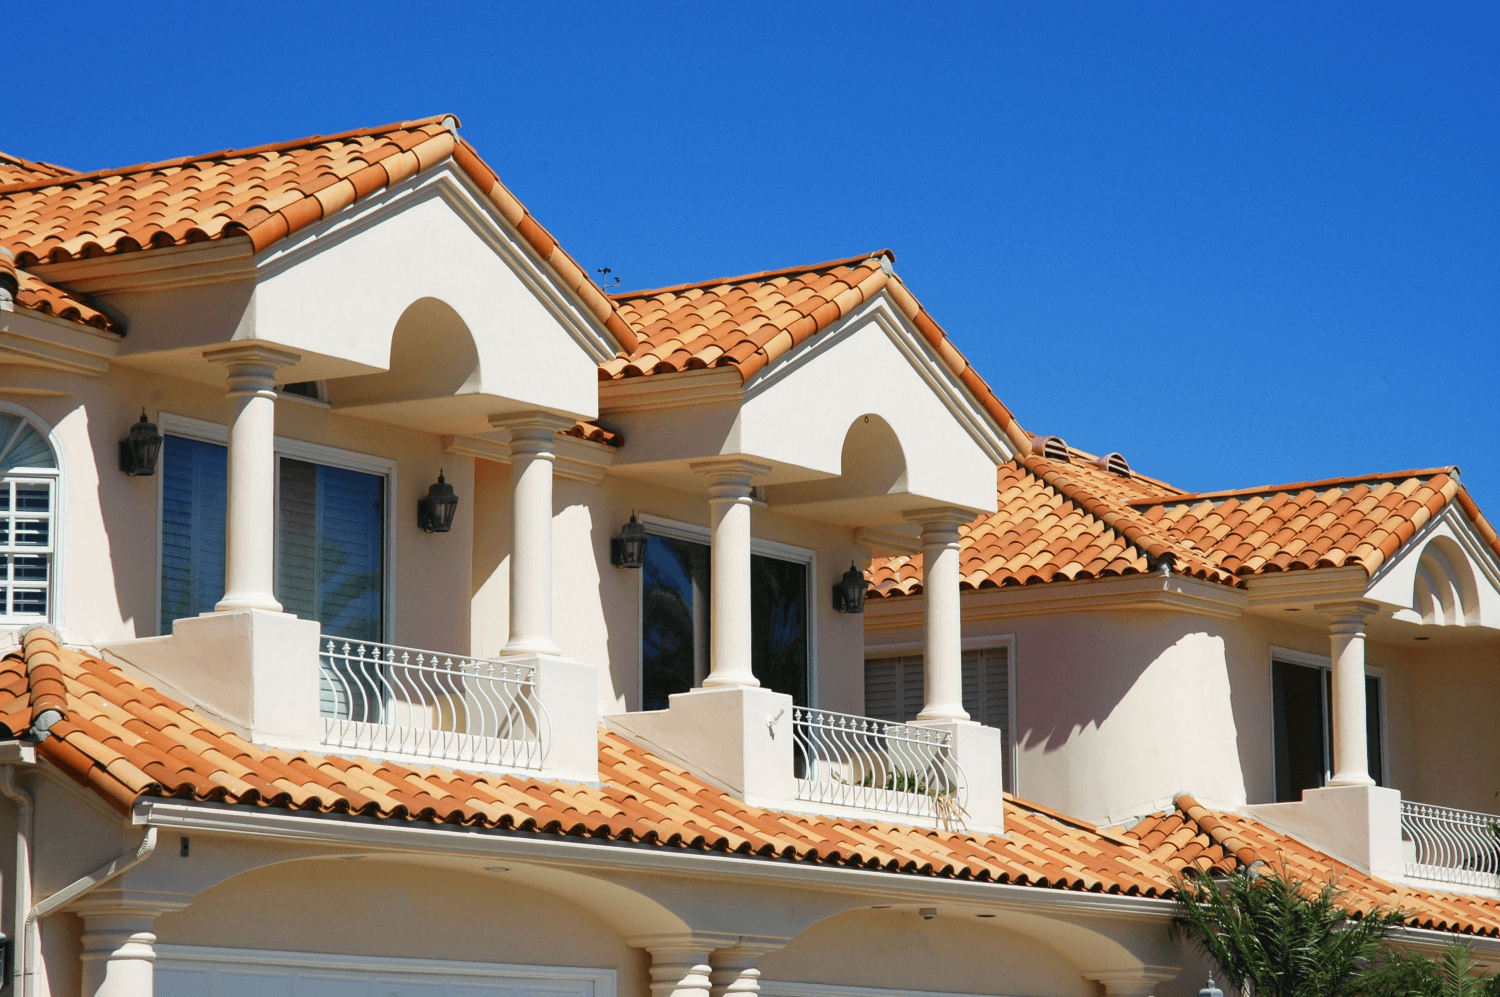 Roof Types & Styles: The Best Roofing Materials for Your California Home